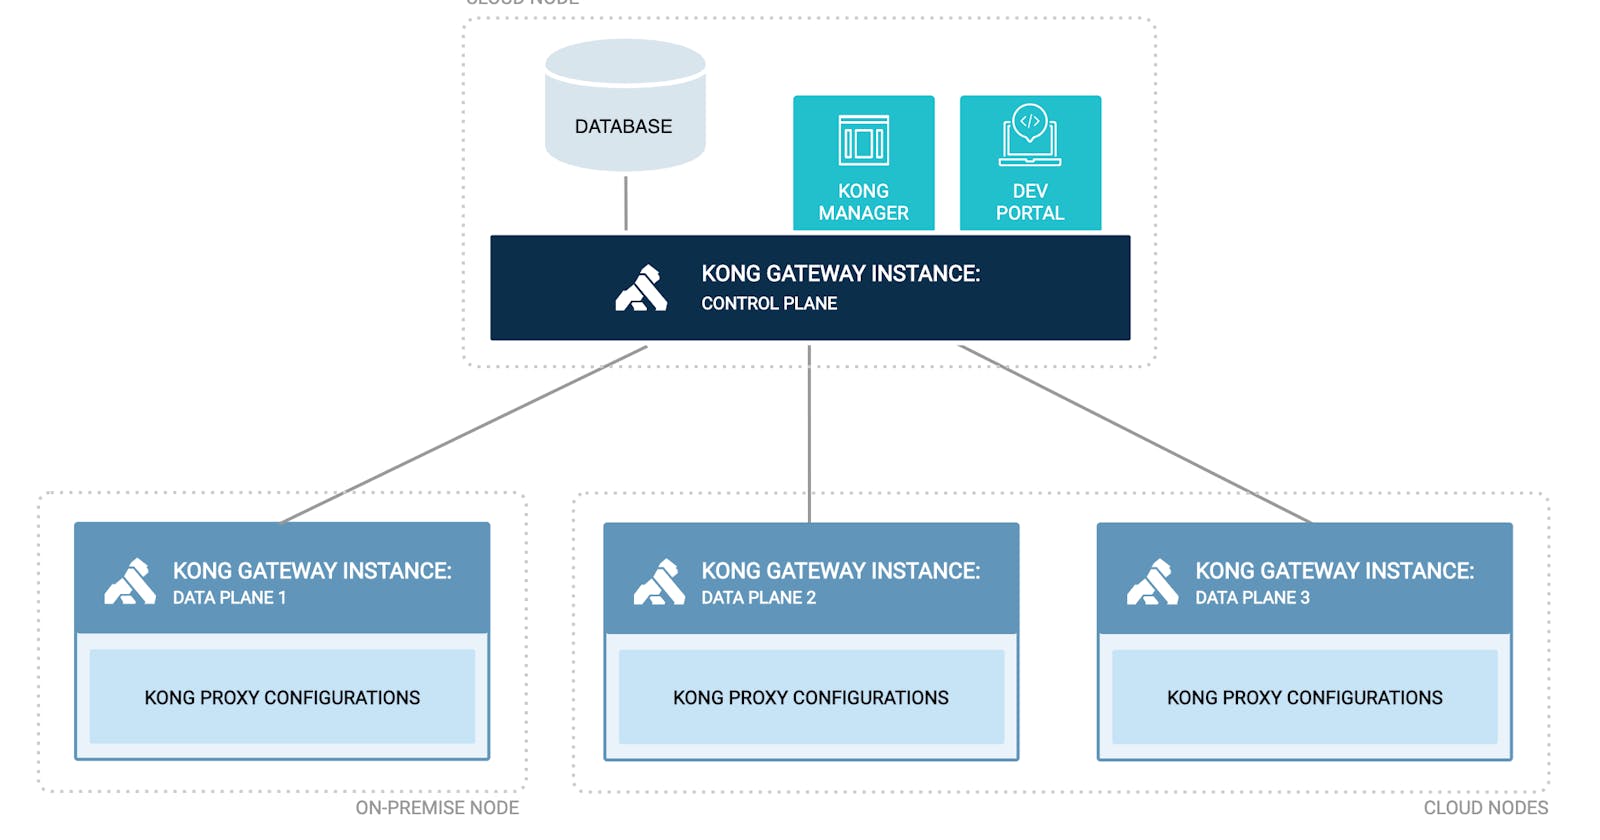 How to deploy Kong Gateway in Hybrid mode using Helm